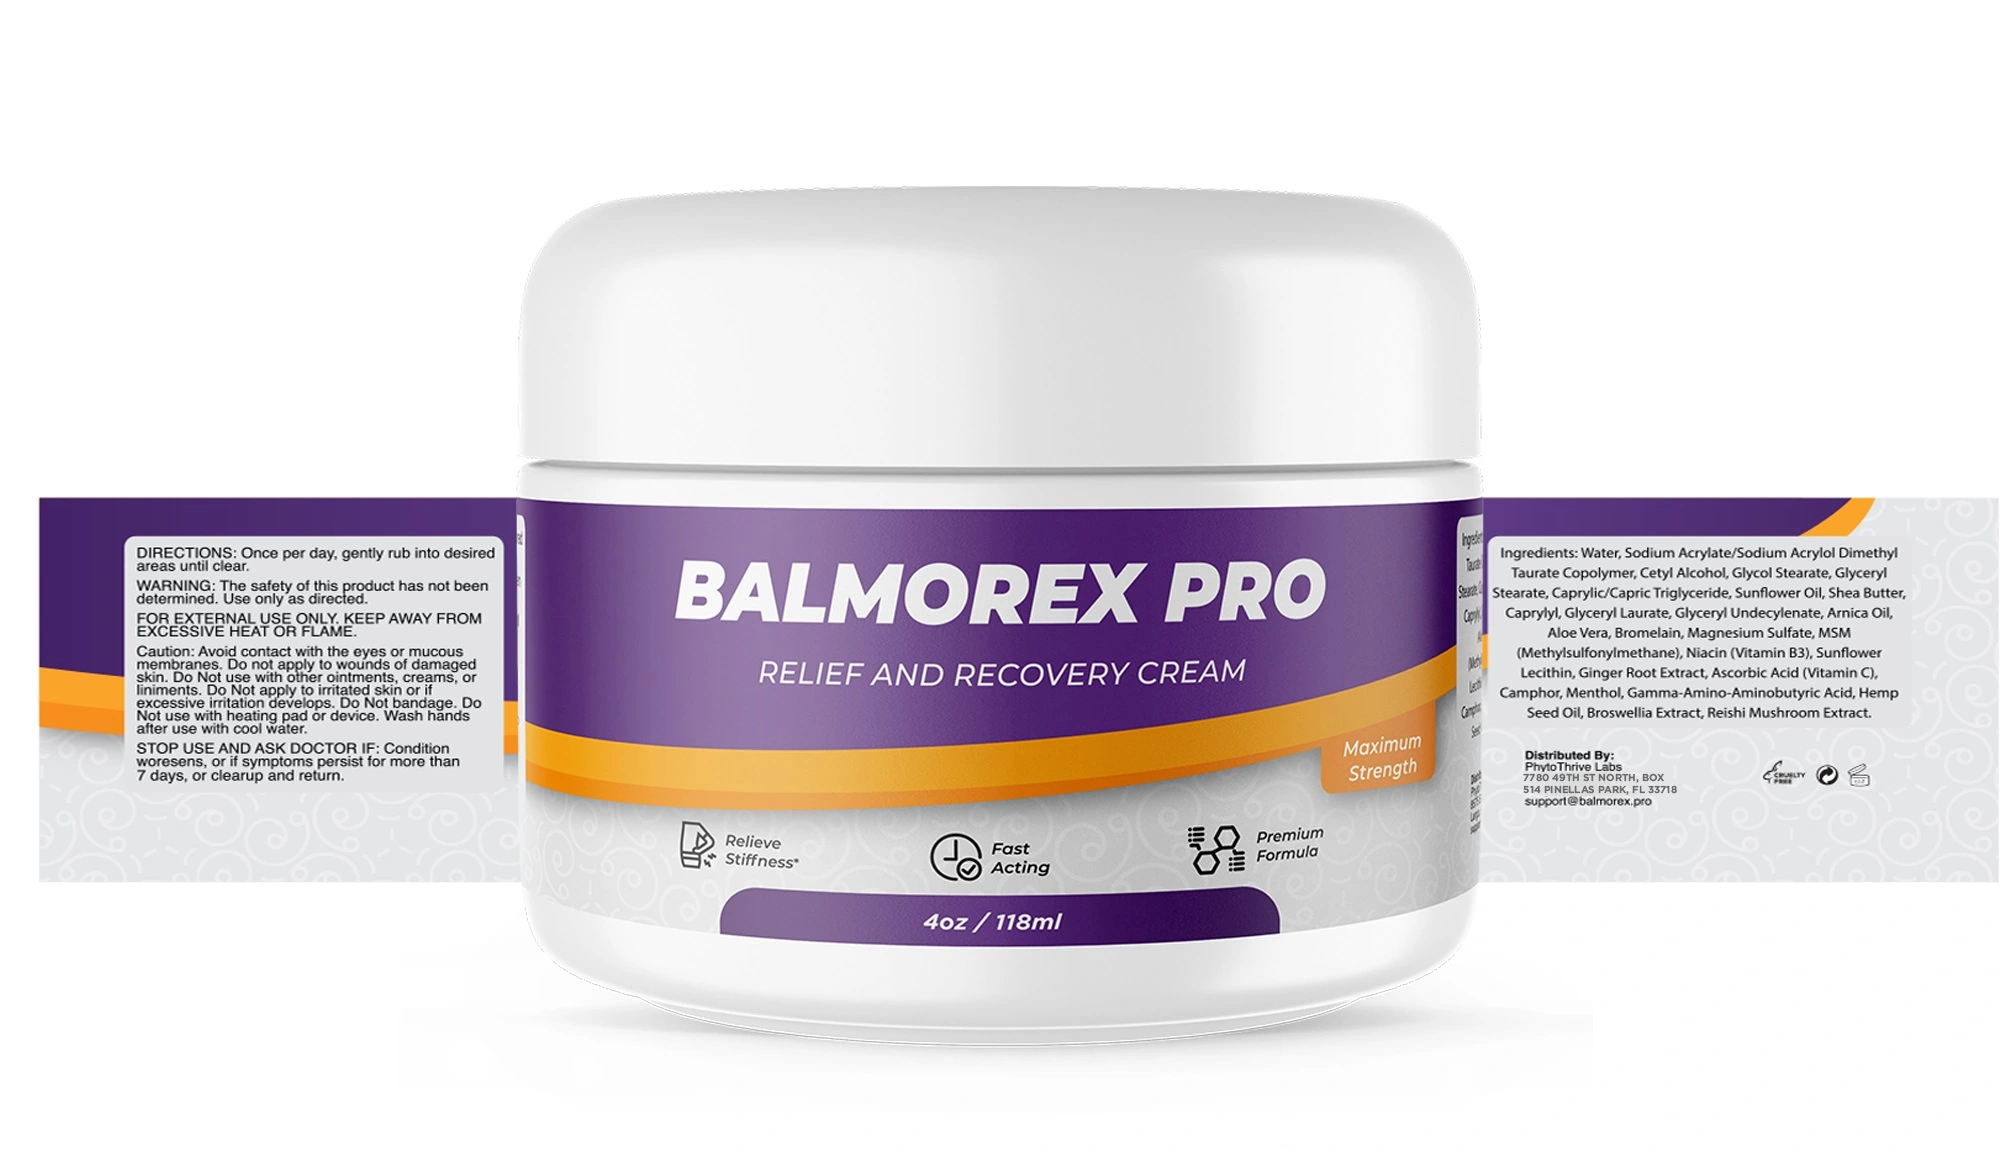 balmorex-pro-relief-and-recovery-cream-supplement-facts